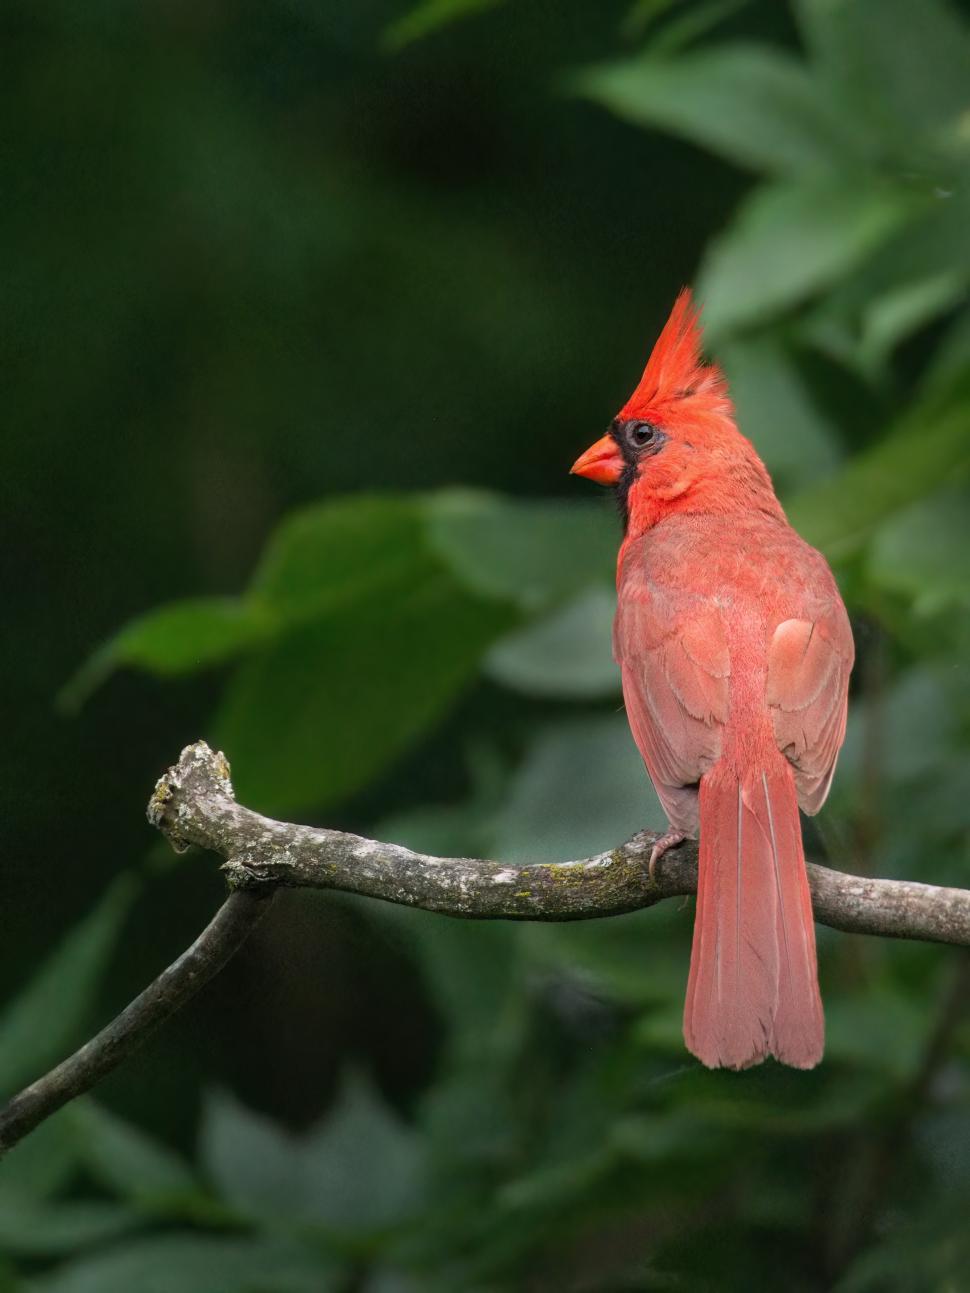 Free Image of A red bird on a branch 